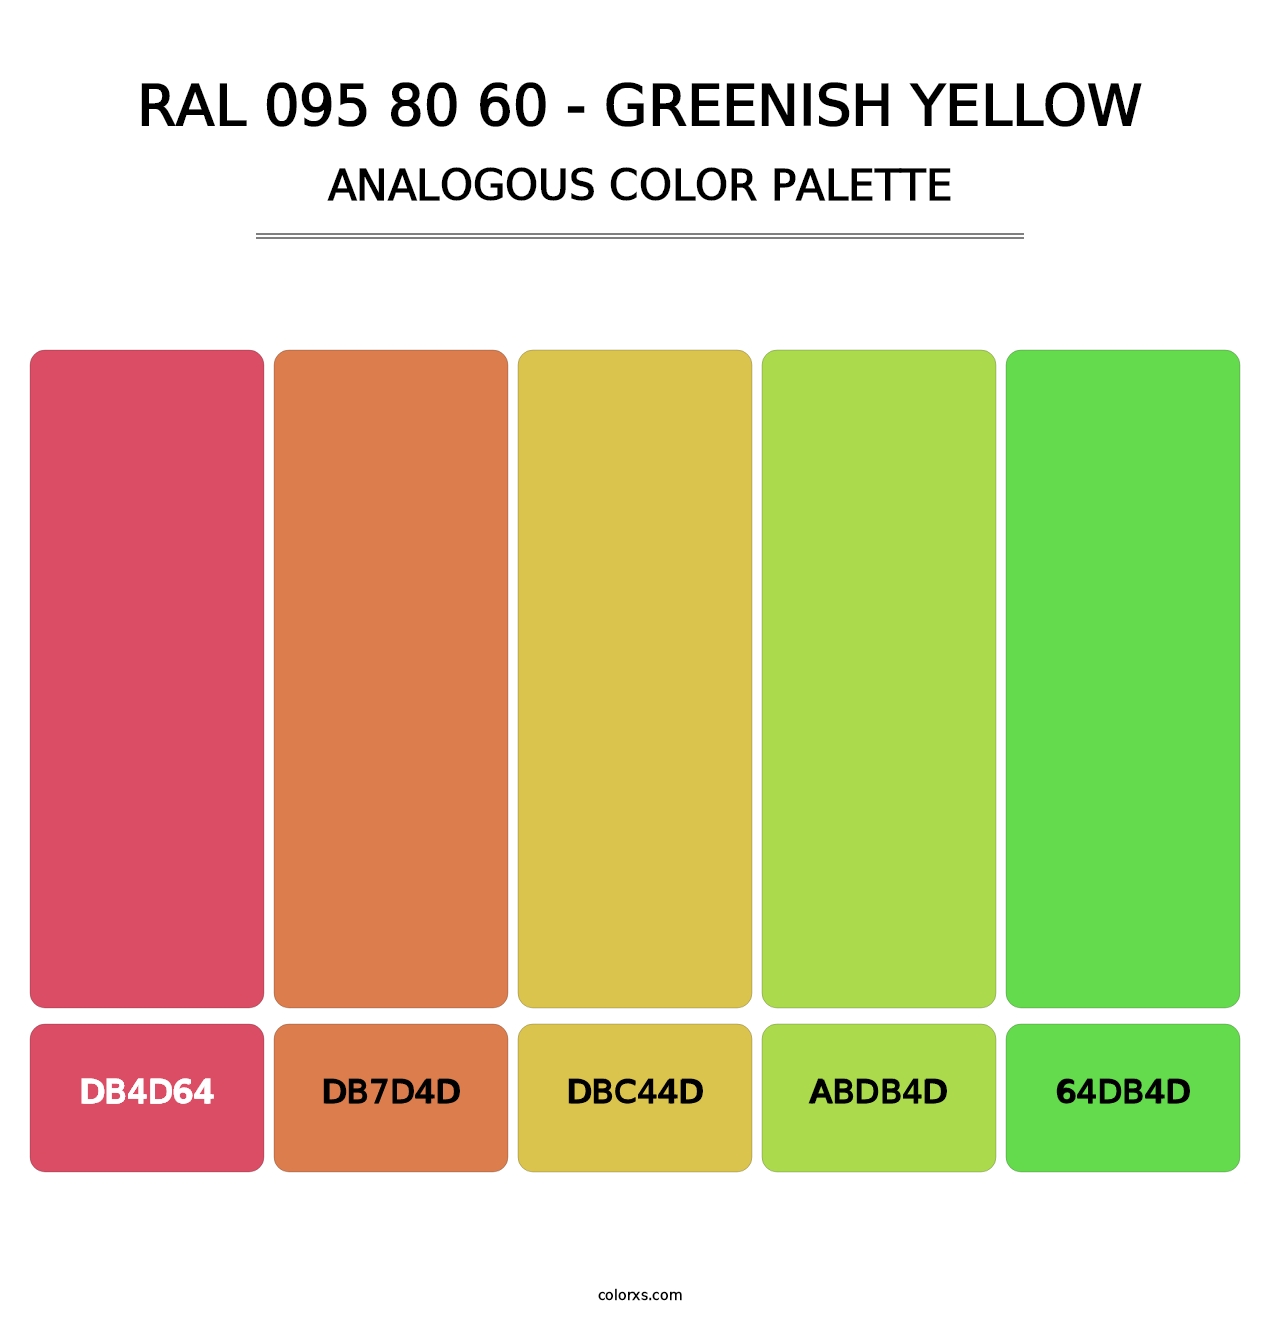 RAL 095 80 60 - Greenish Yellow - Analogous Color Palette